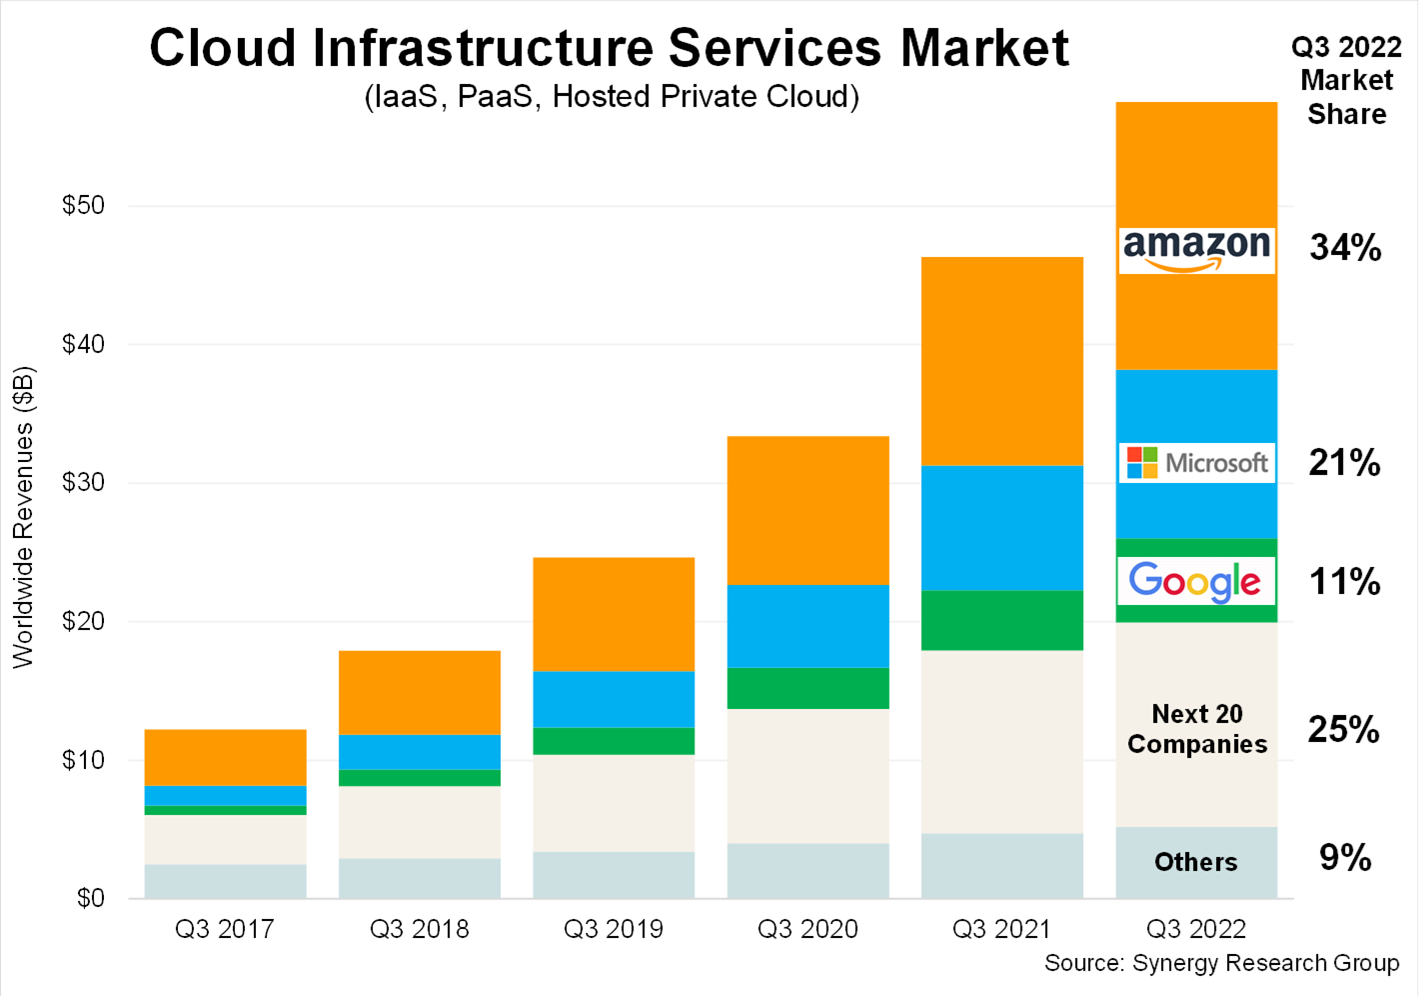 cloud market graph showing AWS with highest market share